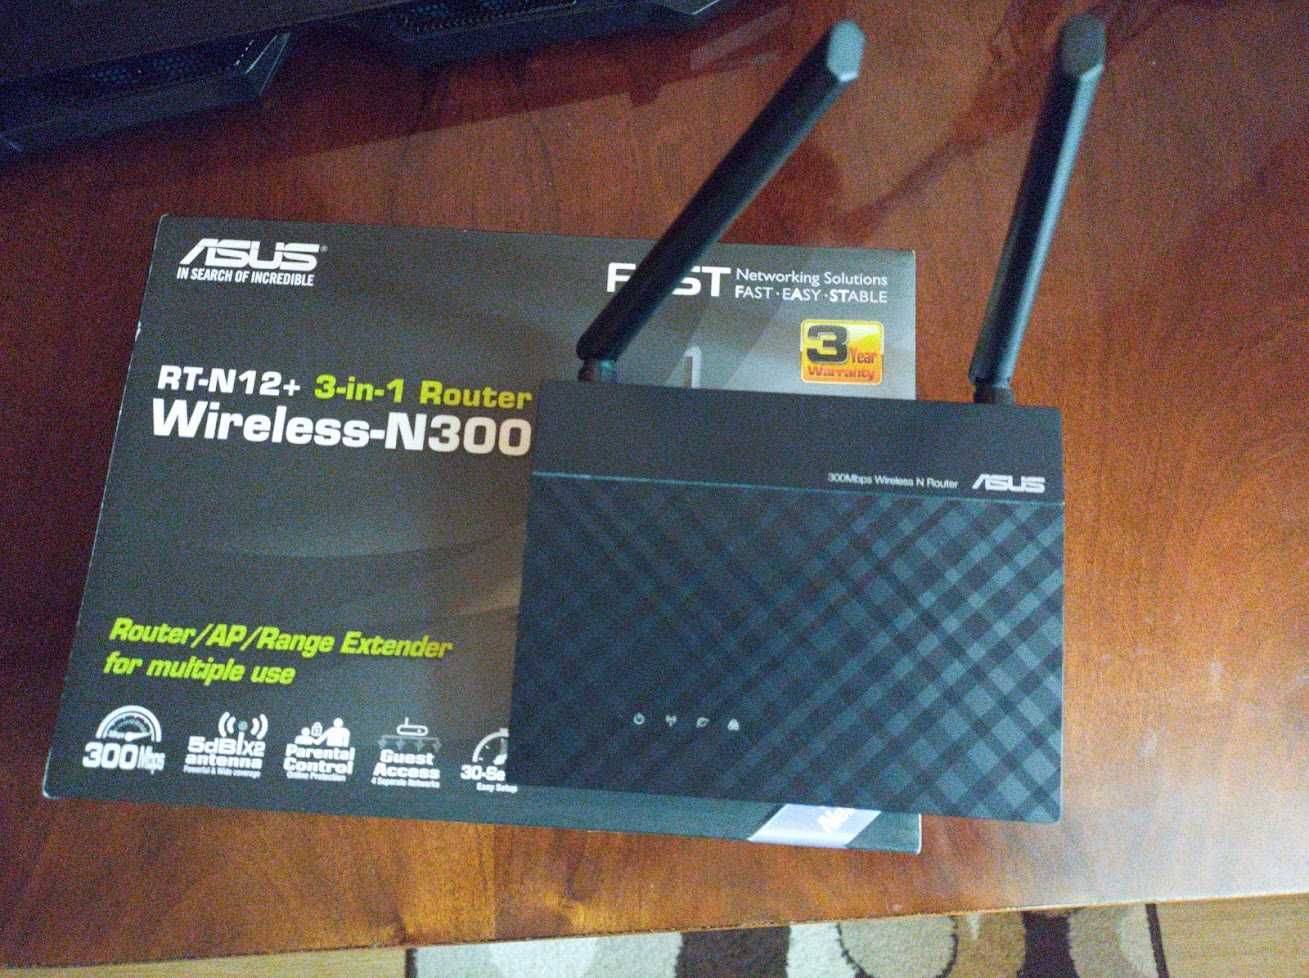 VAND Router wireless ASUS RT-N12+, 300Mbps